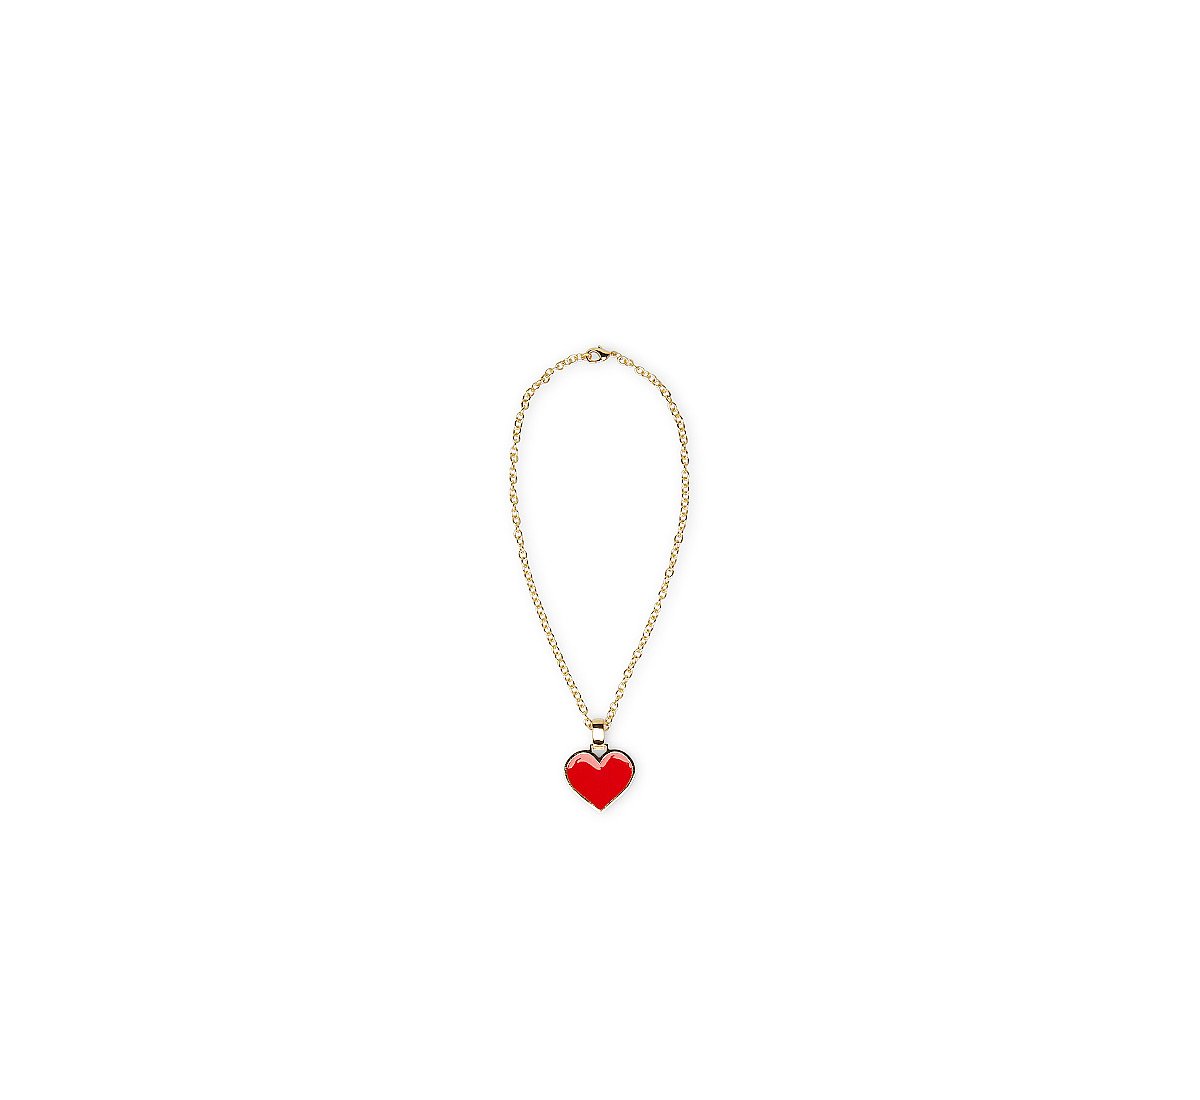 SMALL HEART PENDANT NECKLACE